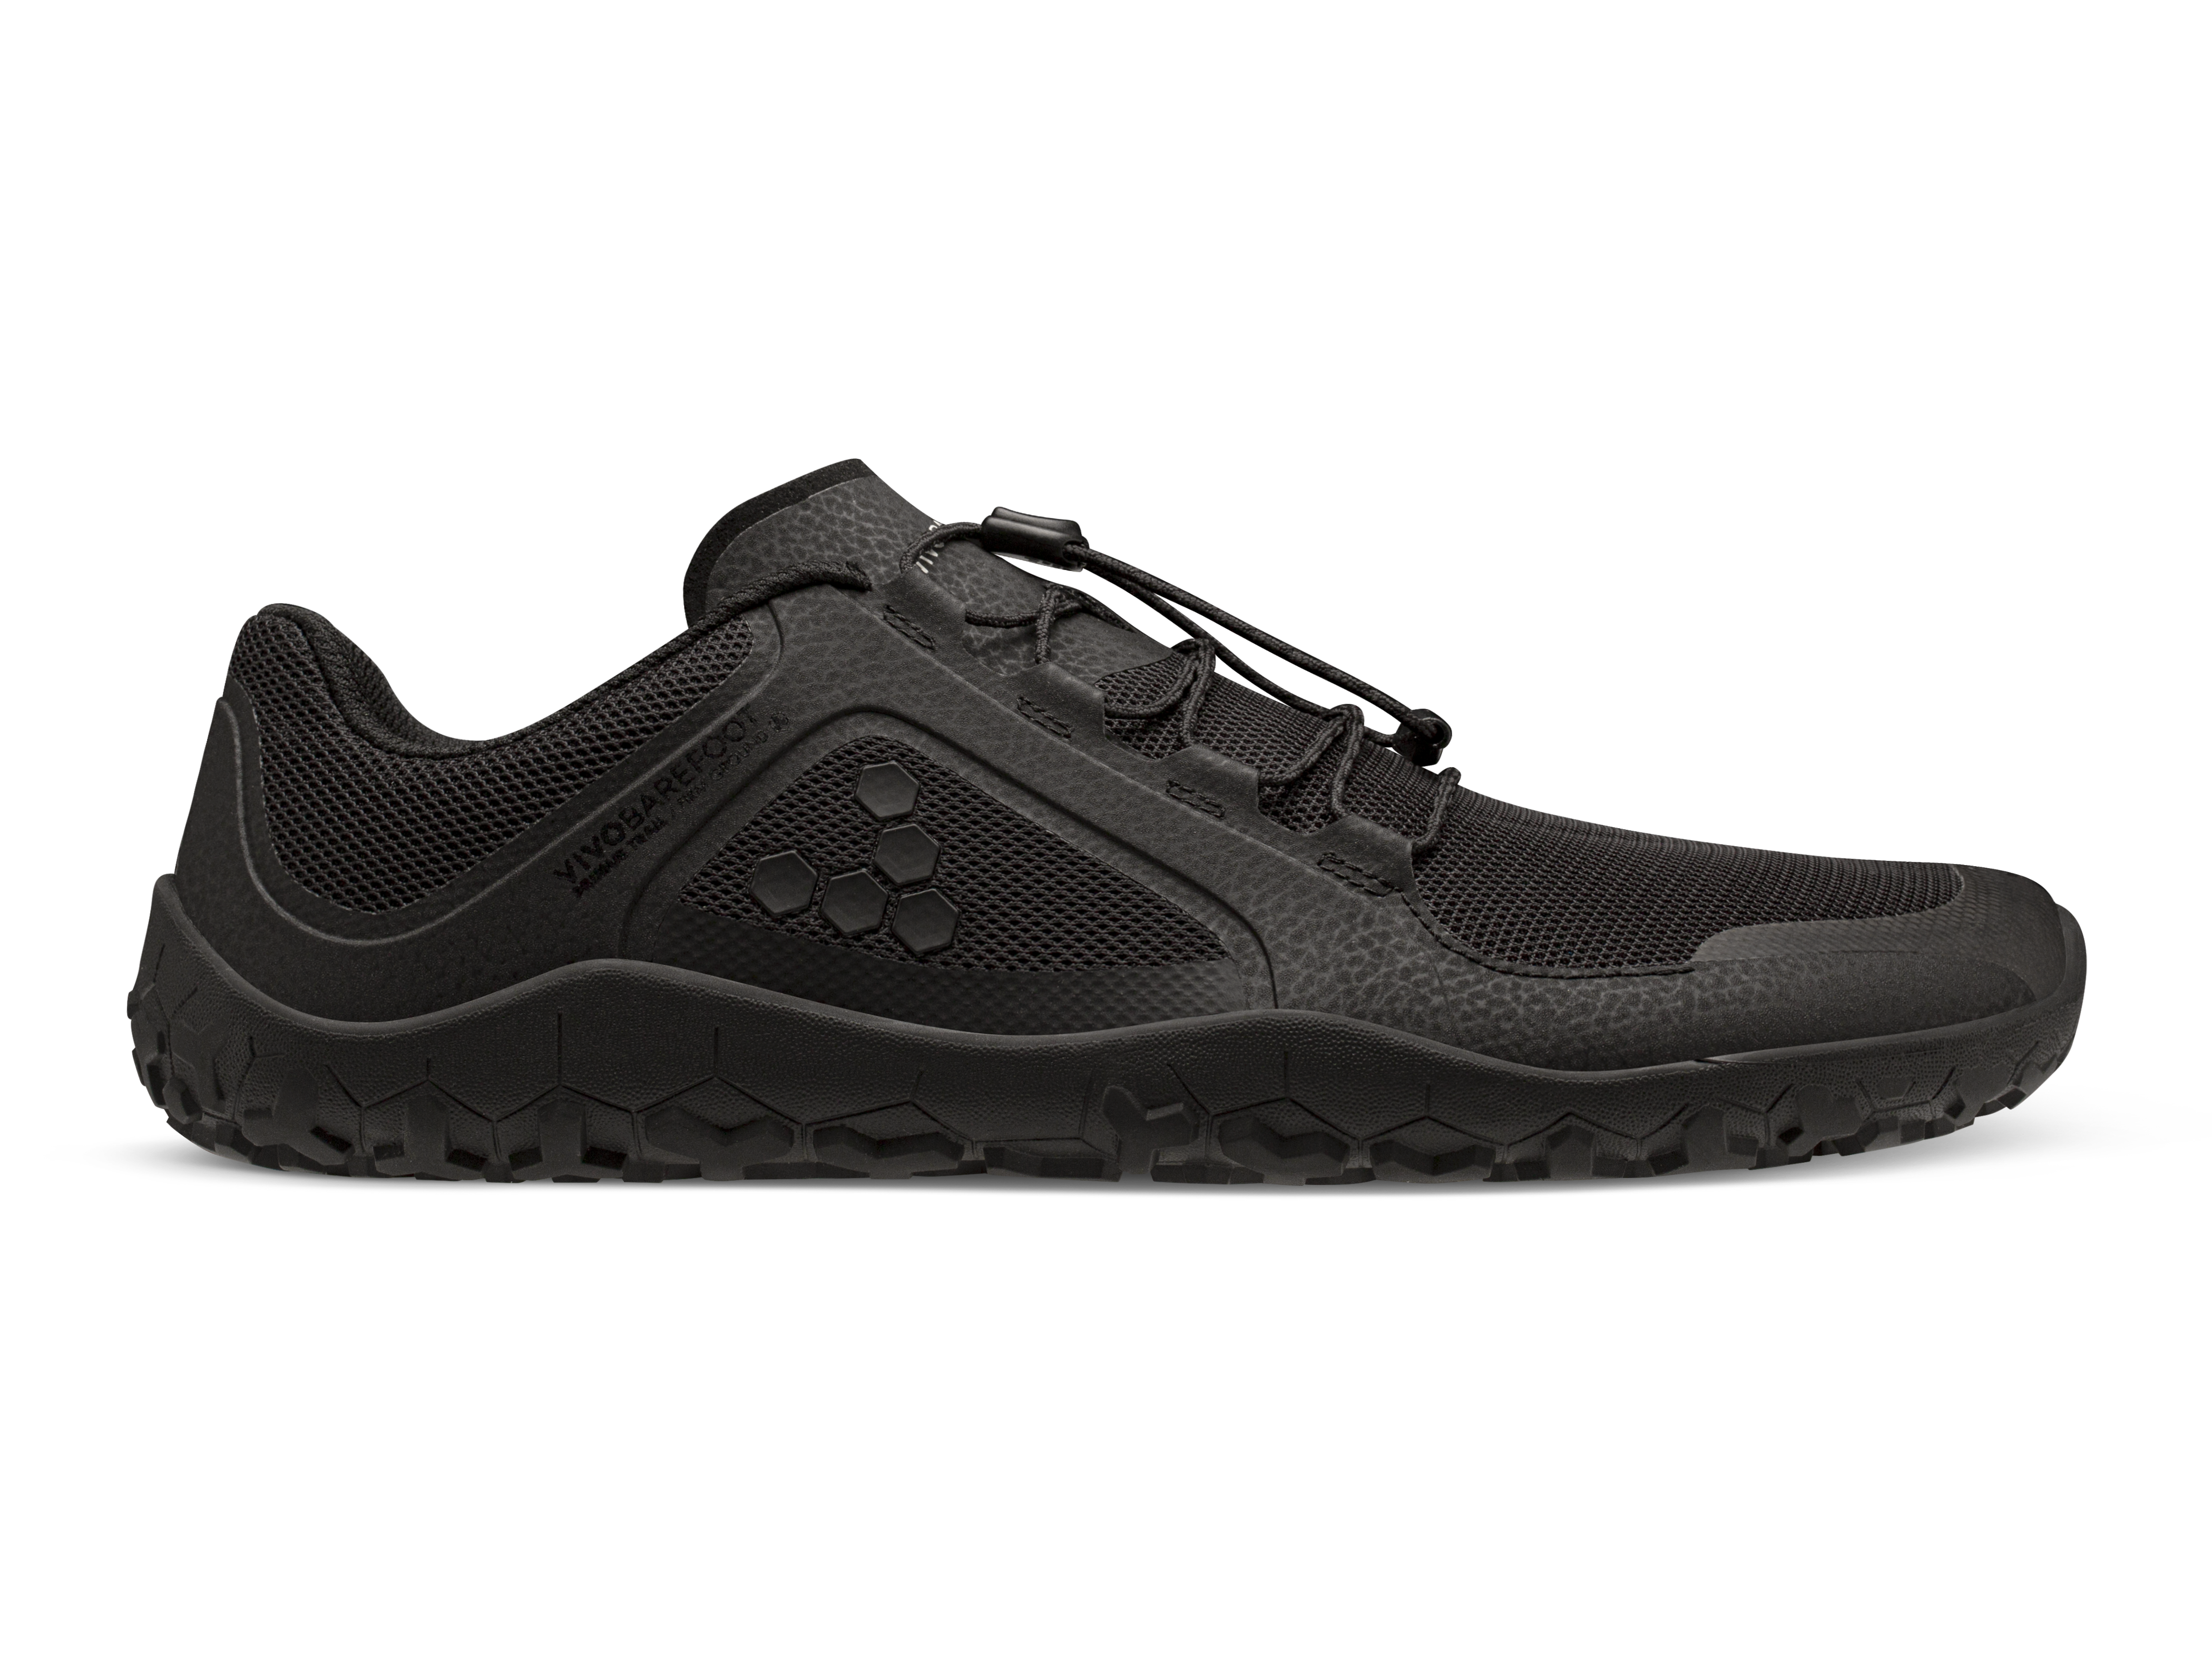 Vivobarefoot Primus Trail FG II - Obsidian - £120 available from www.vivobarefoot.co.uk (1).png